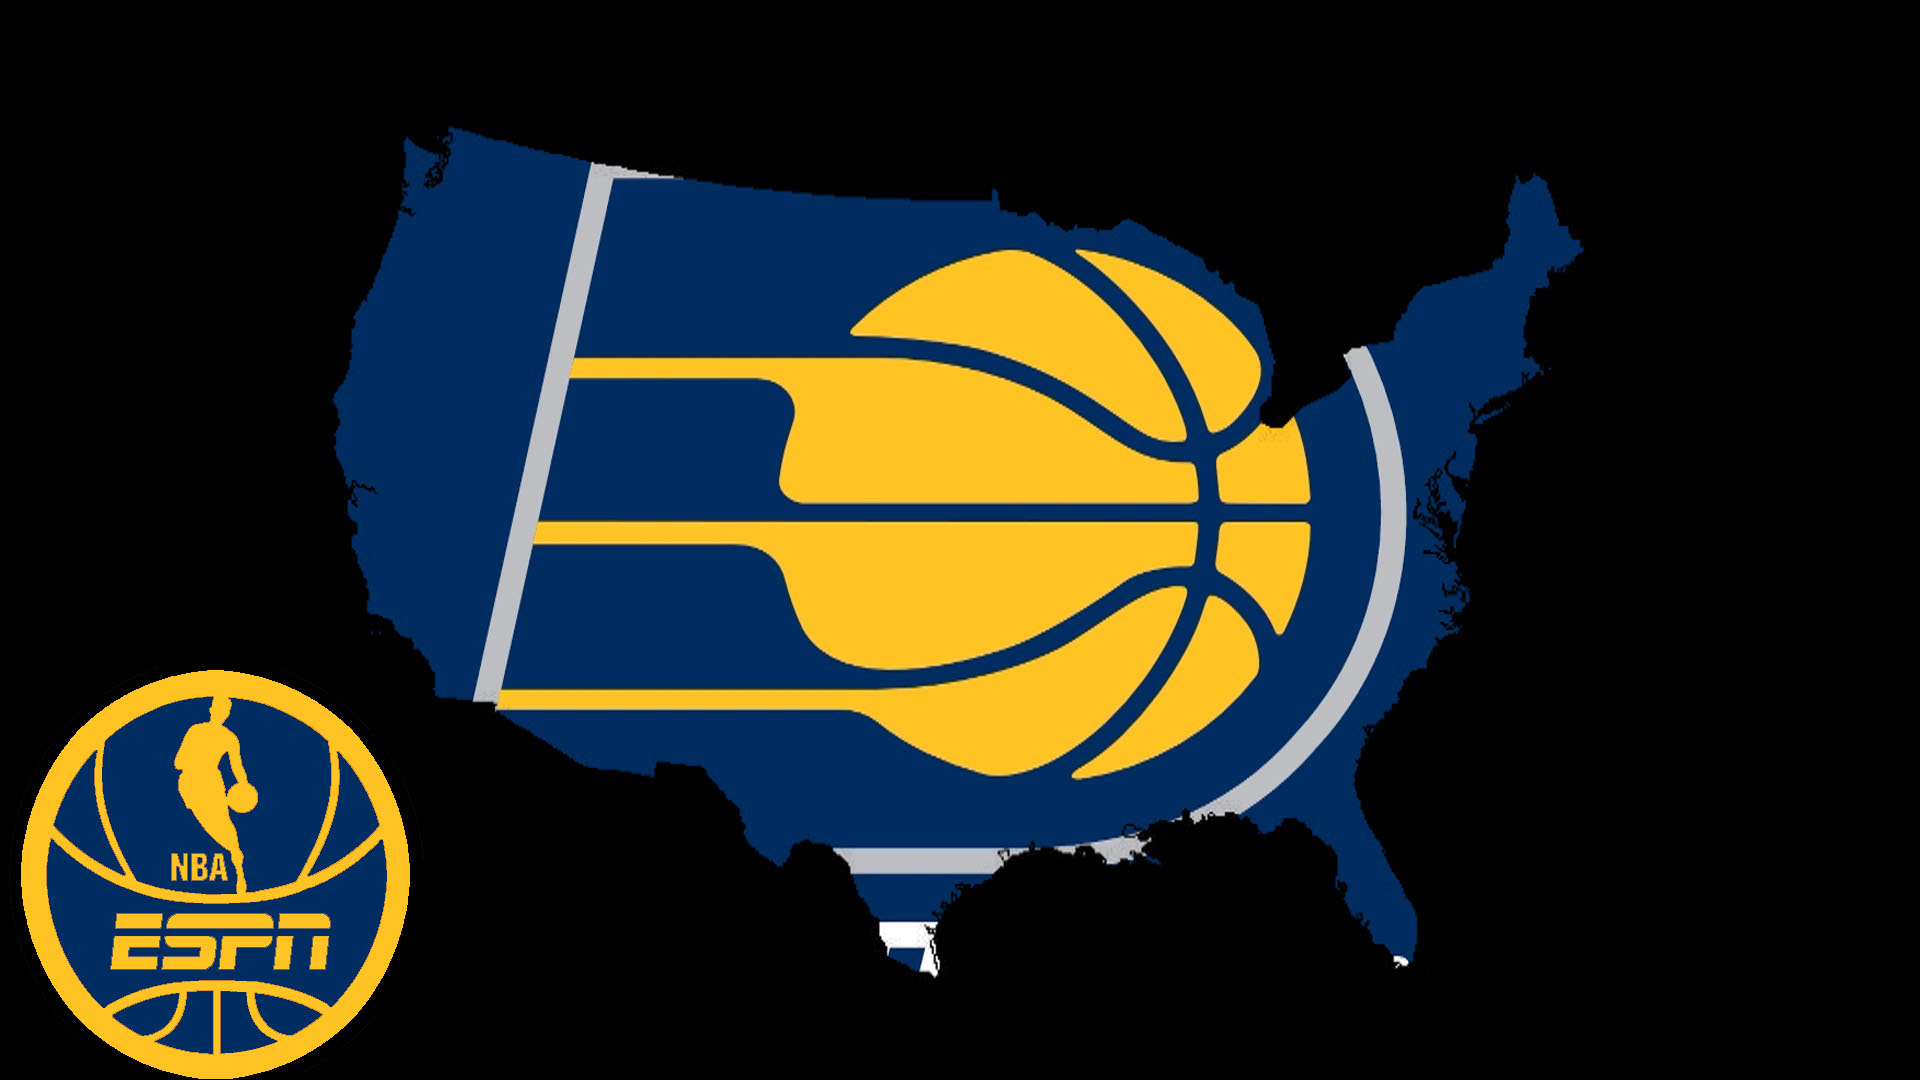 Indiana Pacers Wallpaper 14   1920 X 1080 stmednet